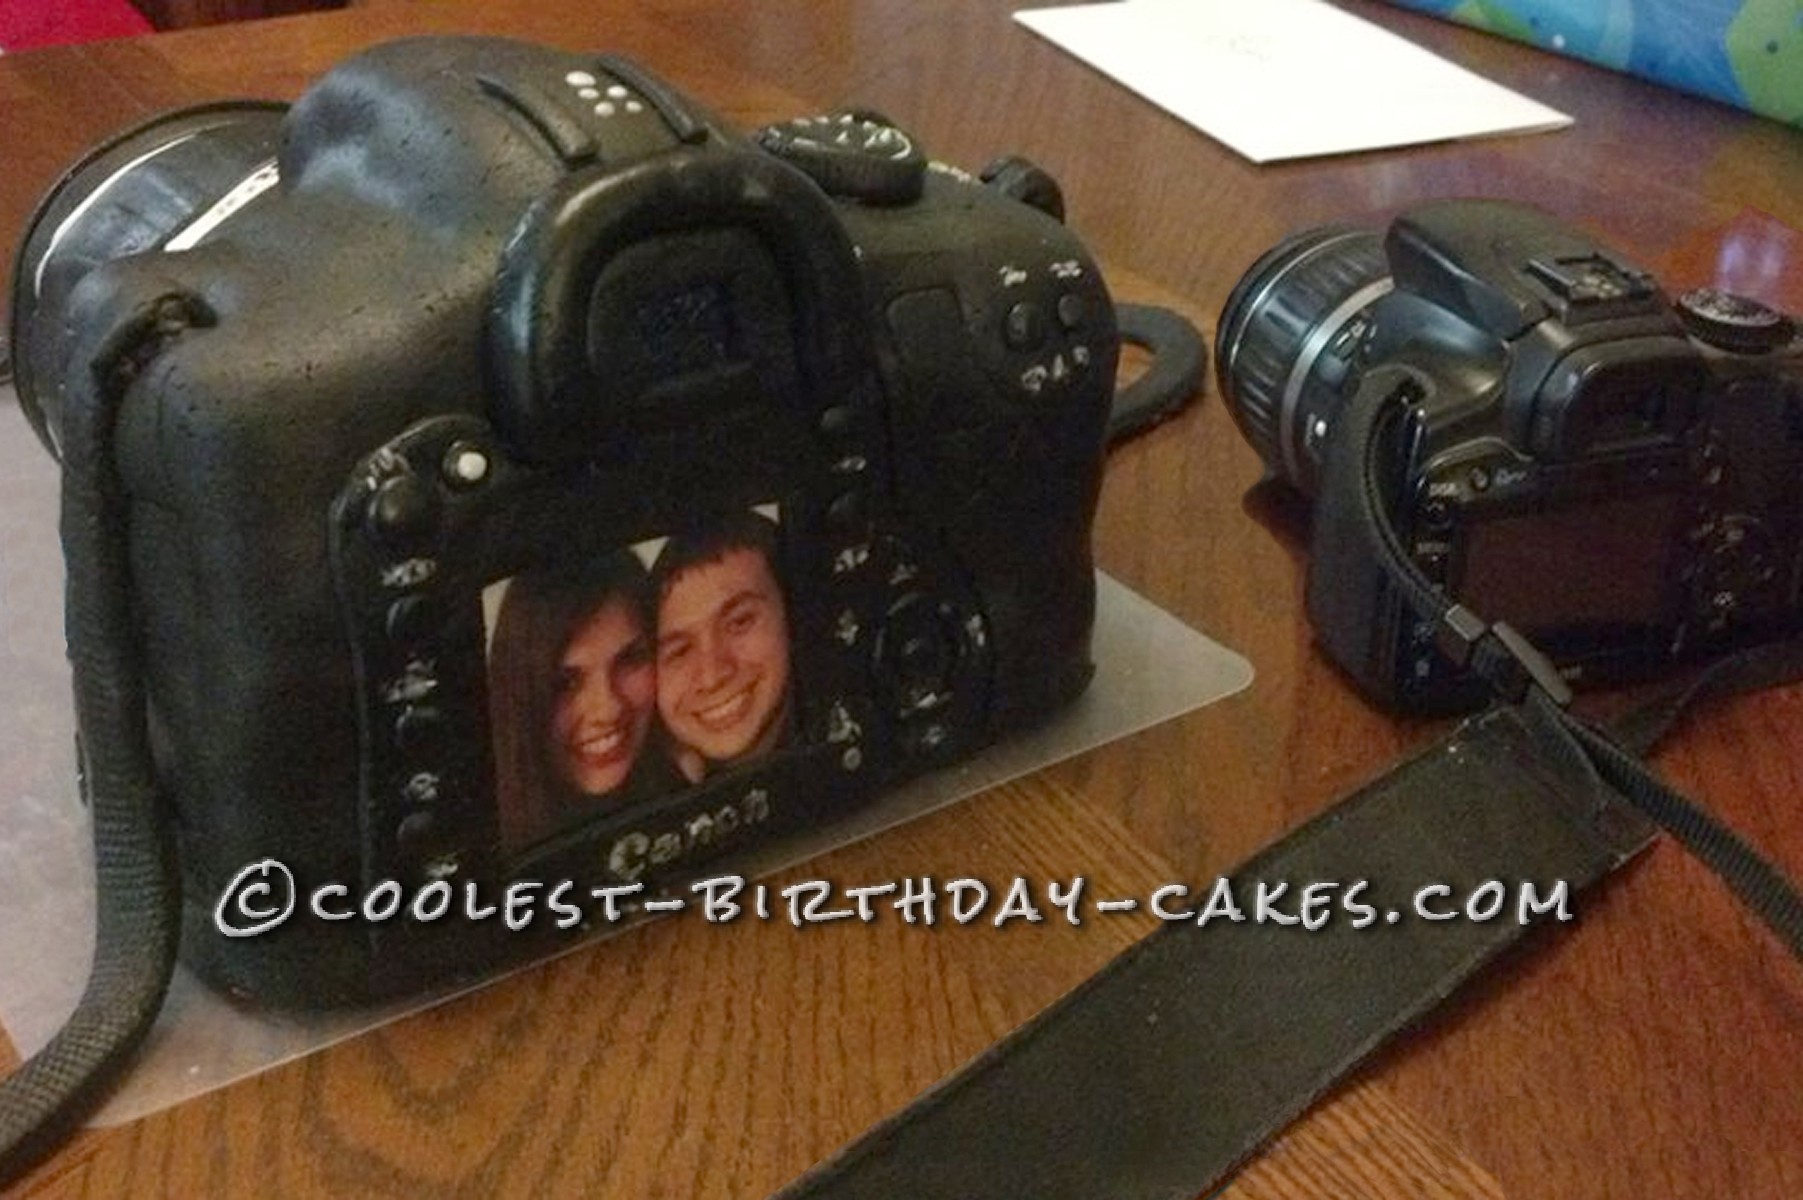 Back of Camera Cake in comparison with real camera